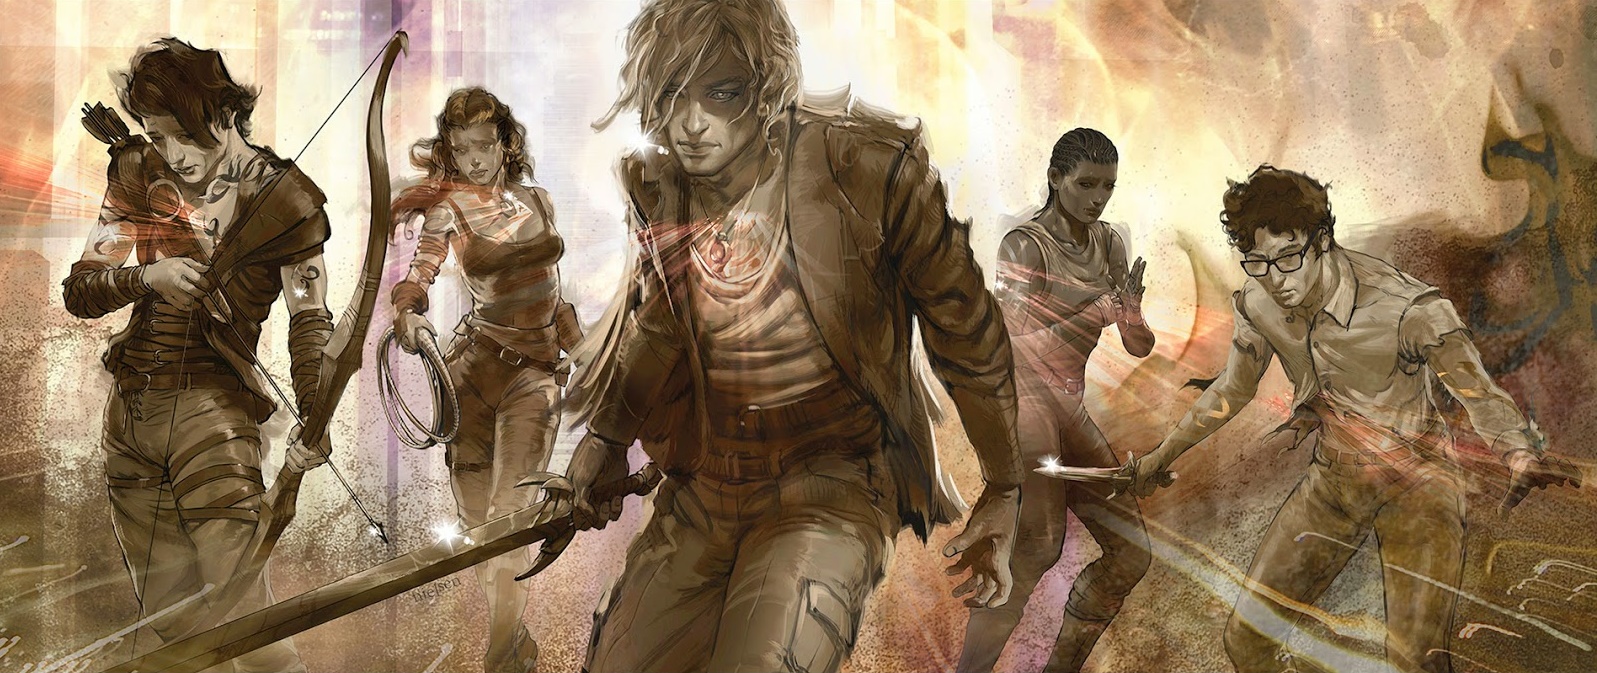 ‘city of heavenly fire’ – review